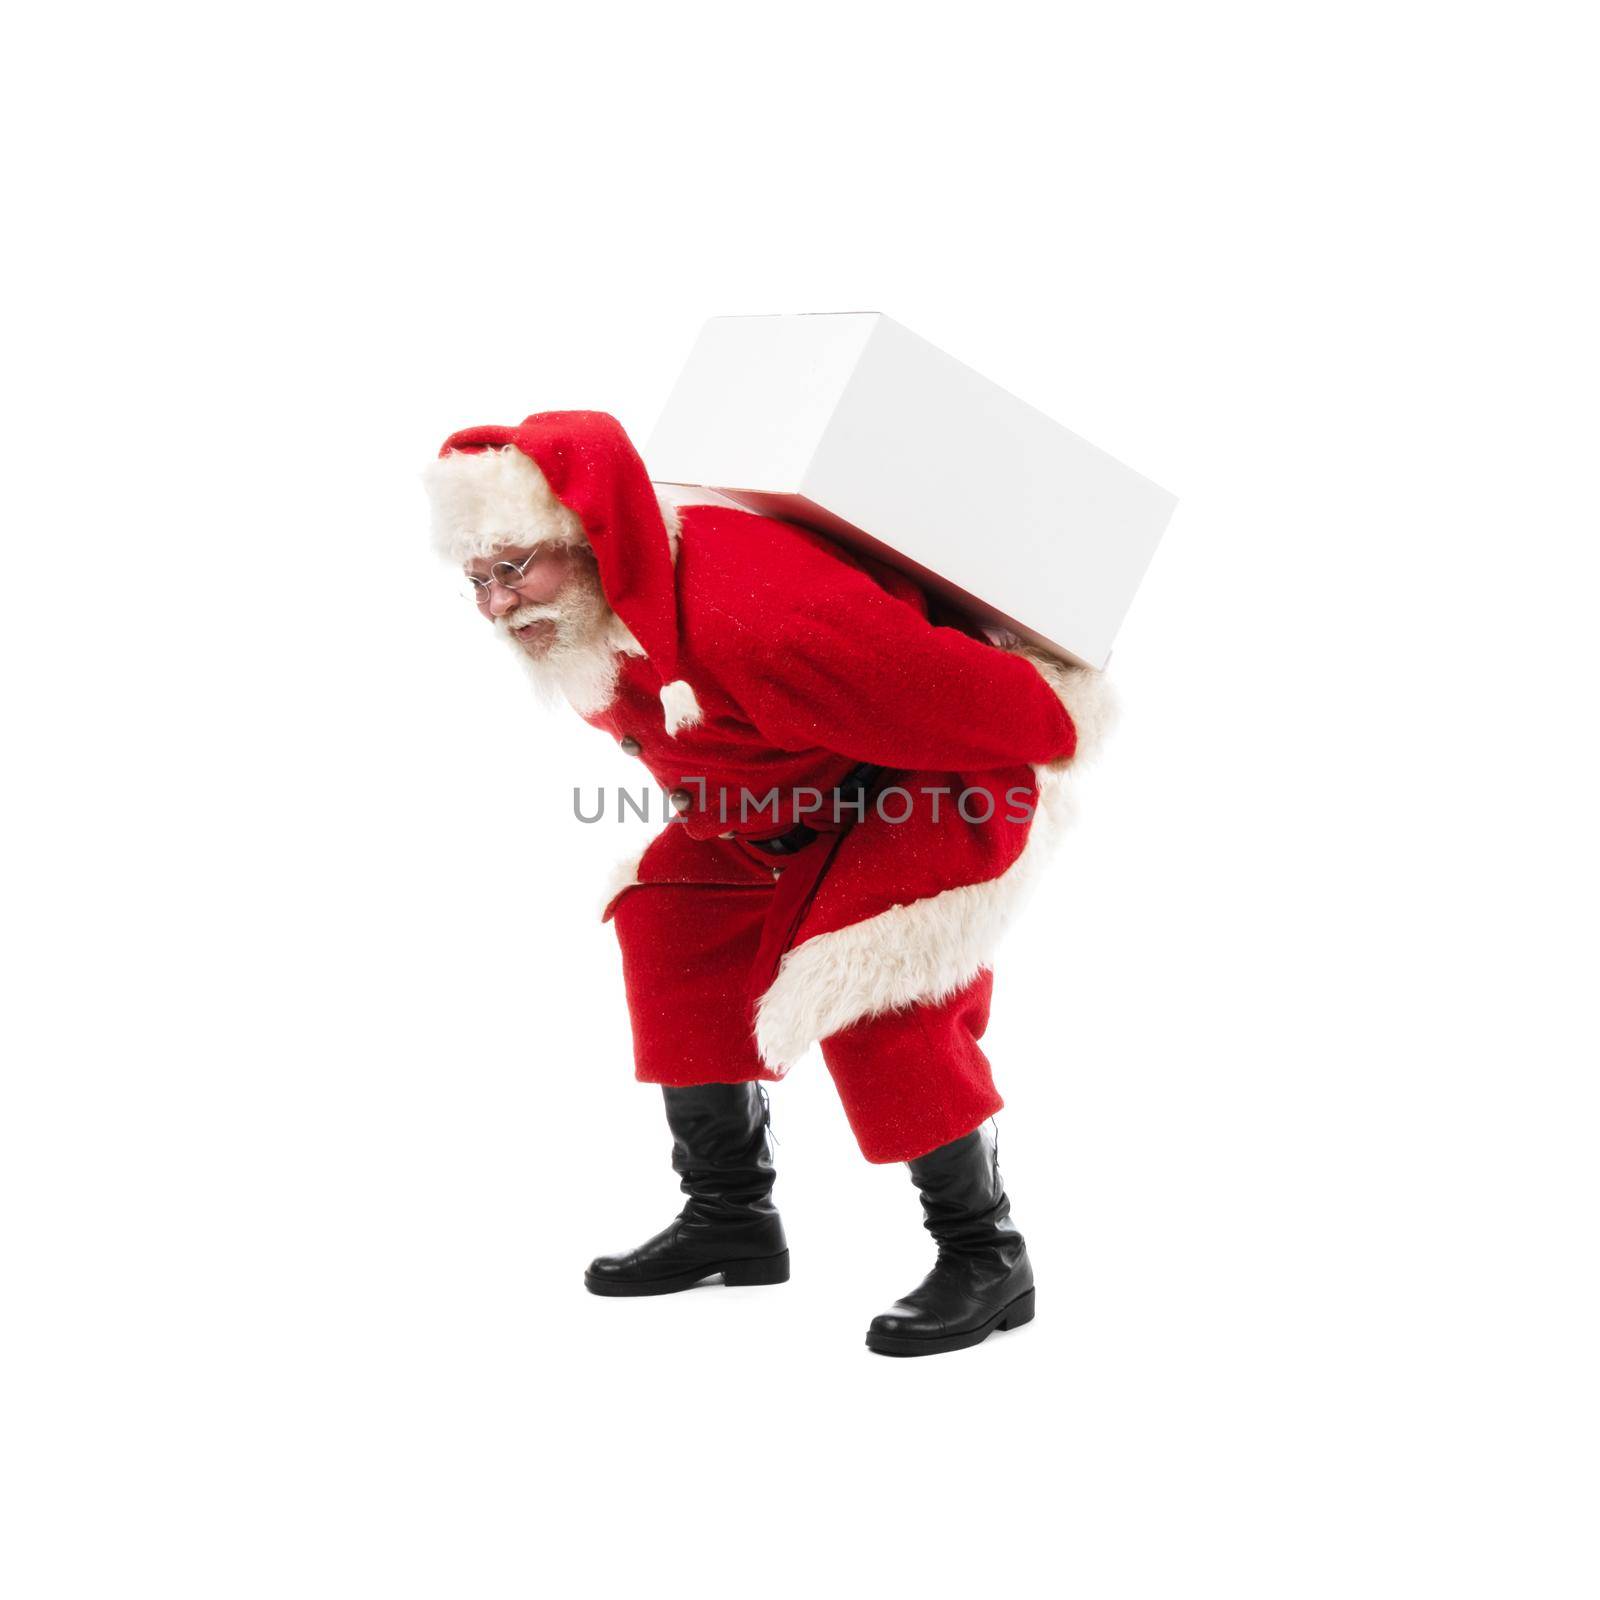 Santa Claus carrying gift box on white by ALotOfPeople